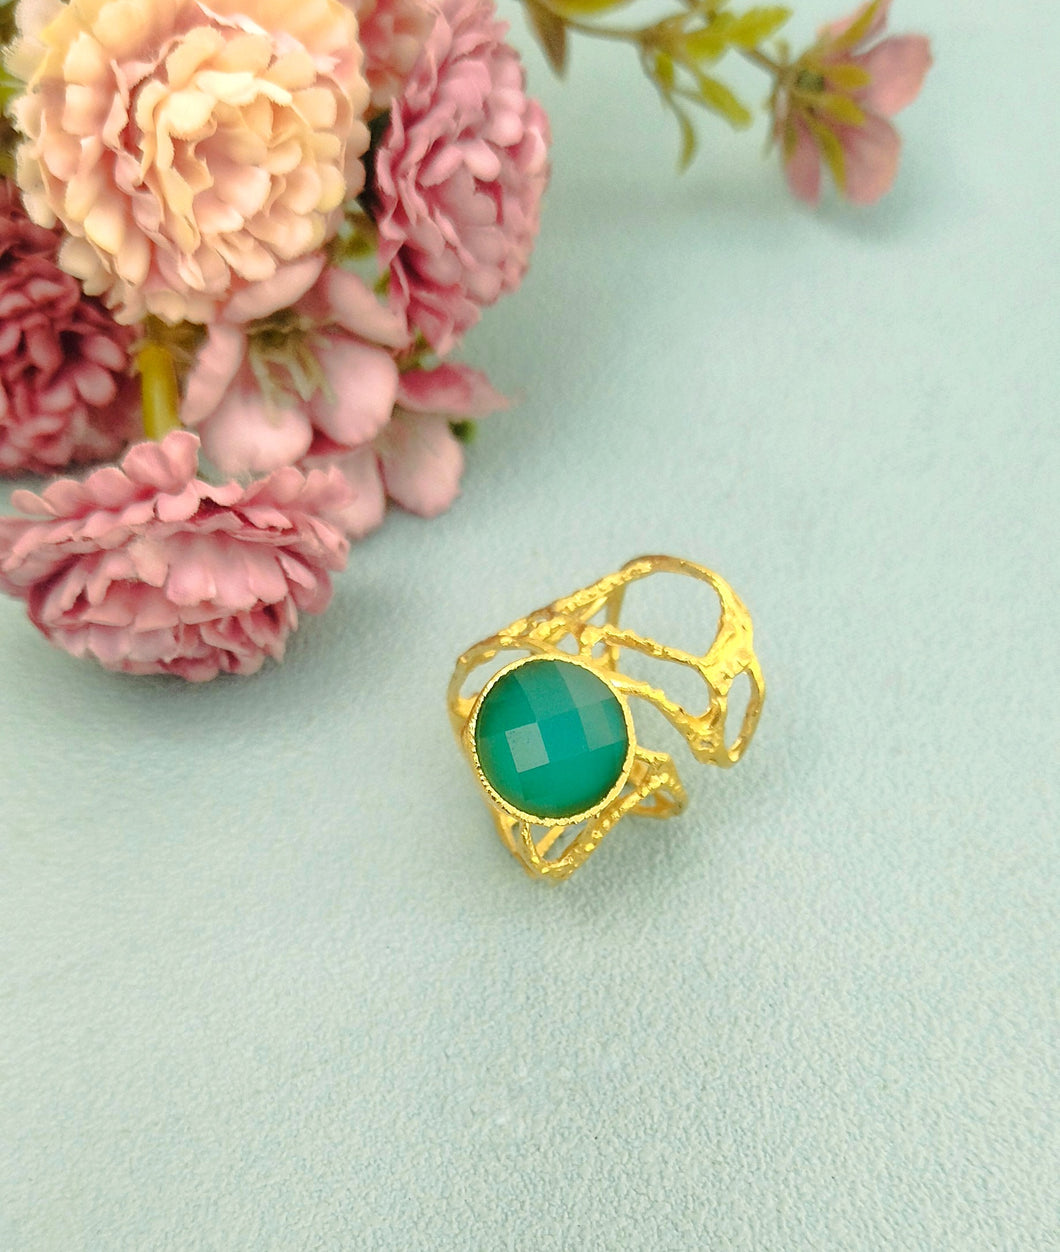 24k Gold Statement Ring, Adjustable Ring With Green Quartz Gemstone, 22nd Wedding Anniversary Gift For Wife